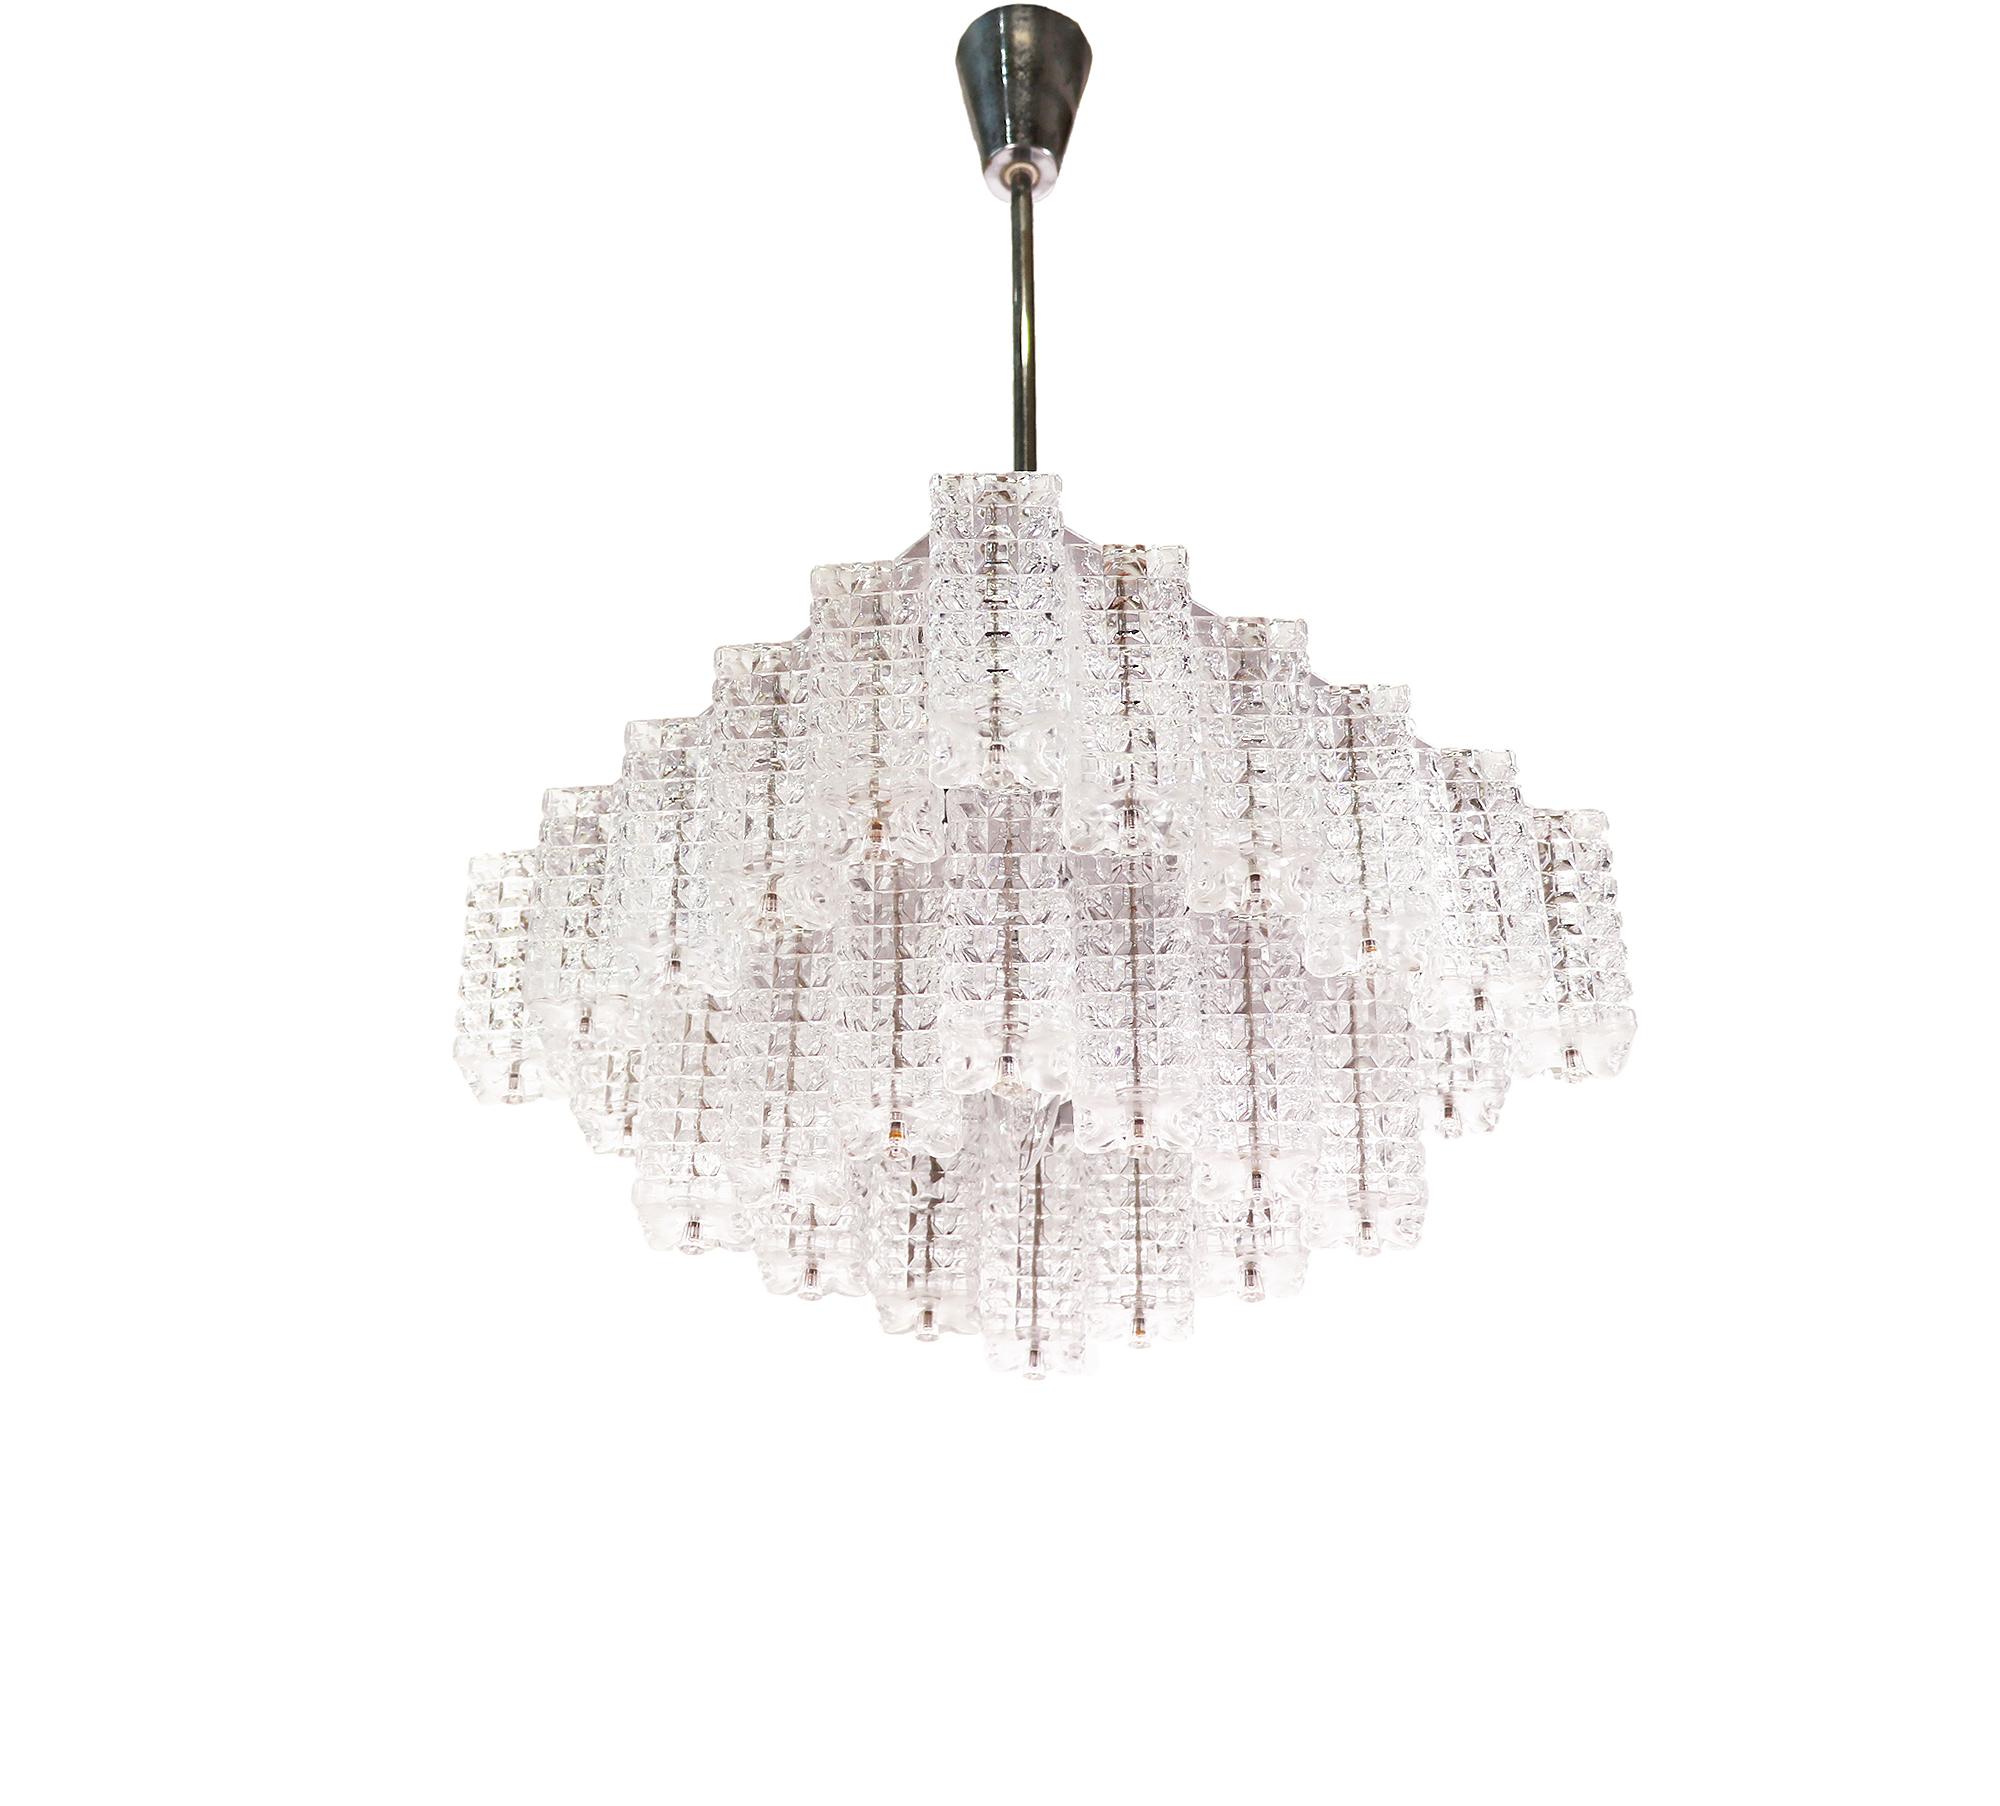 Mid-Century Modern Square Chandelier Glass & Chrome by Austrolux, Vienna, 1960s For Sale